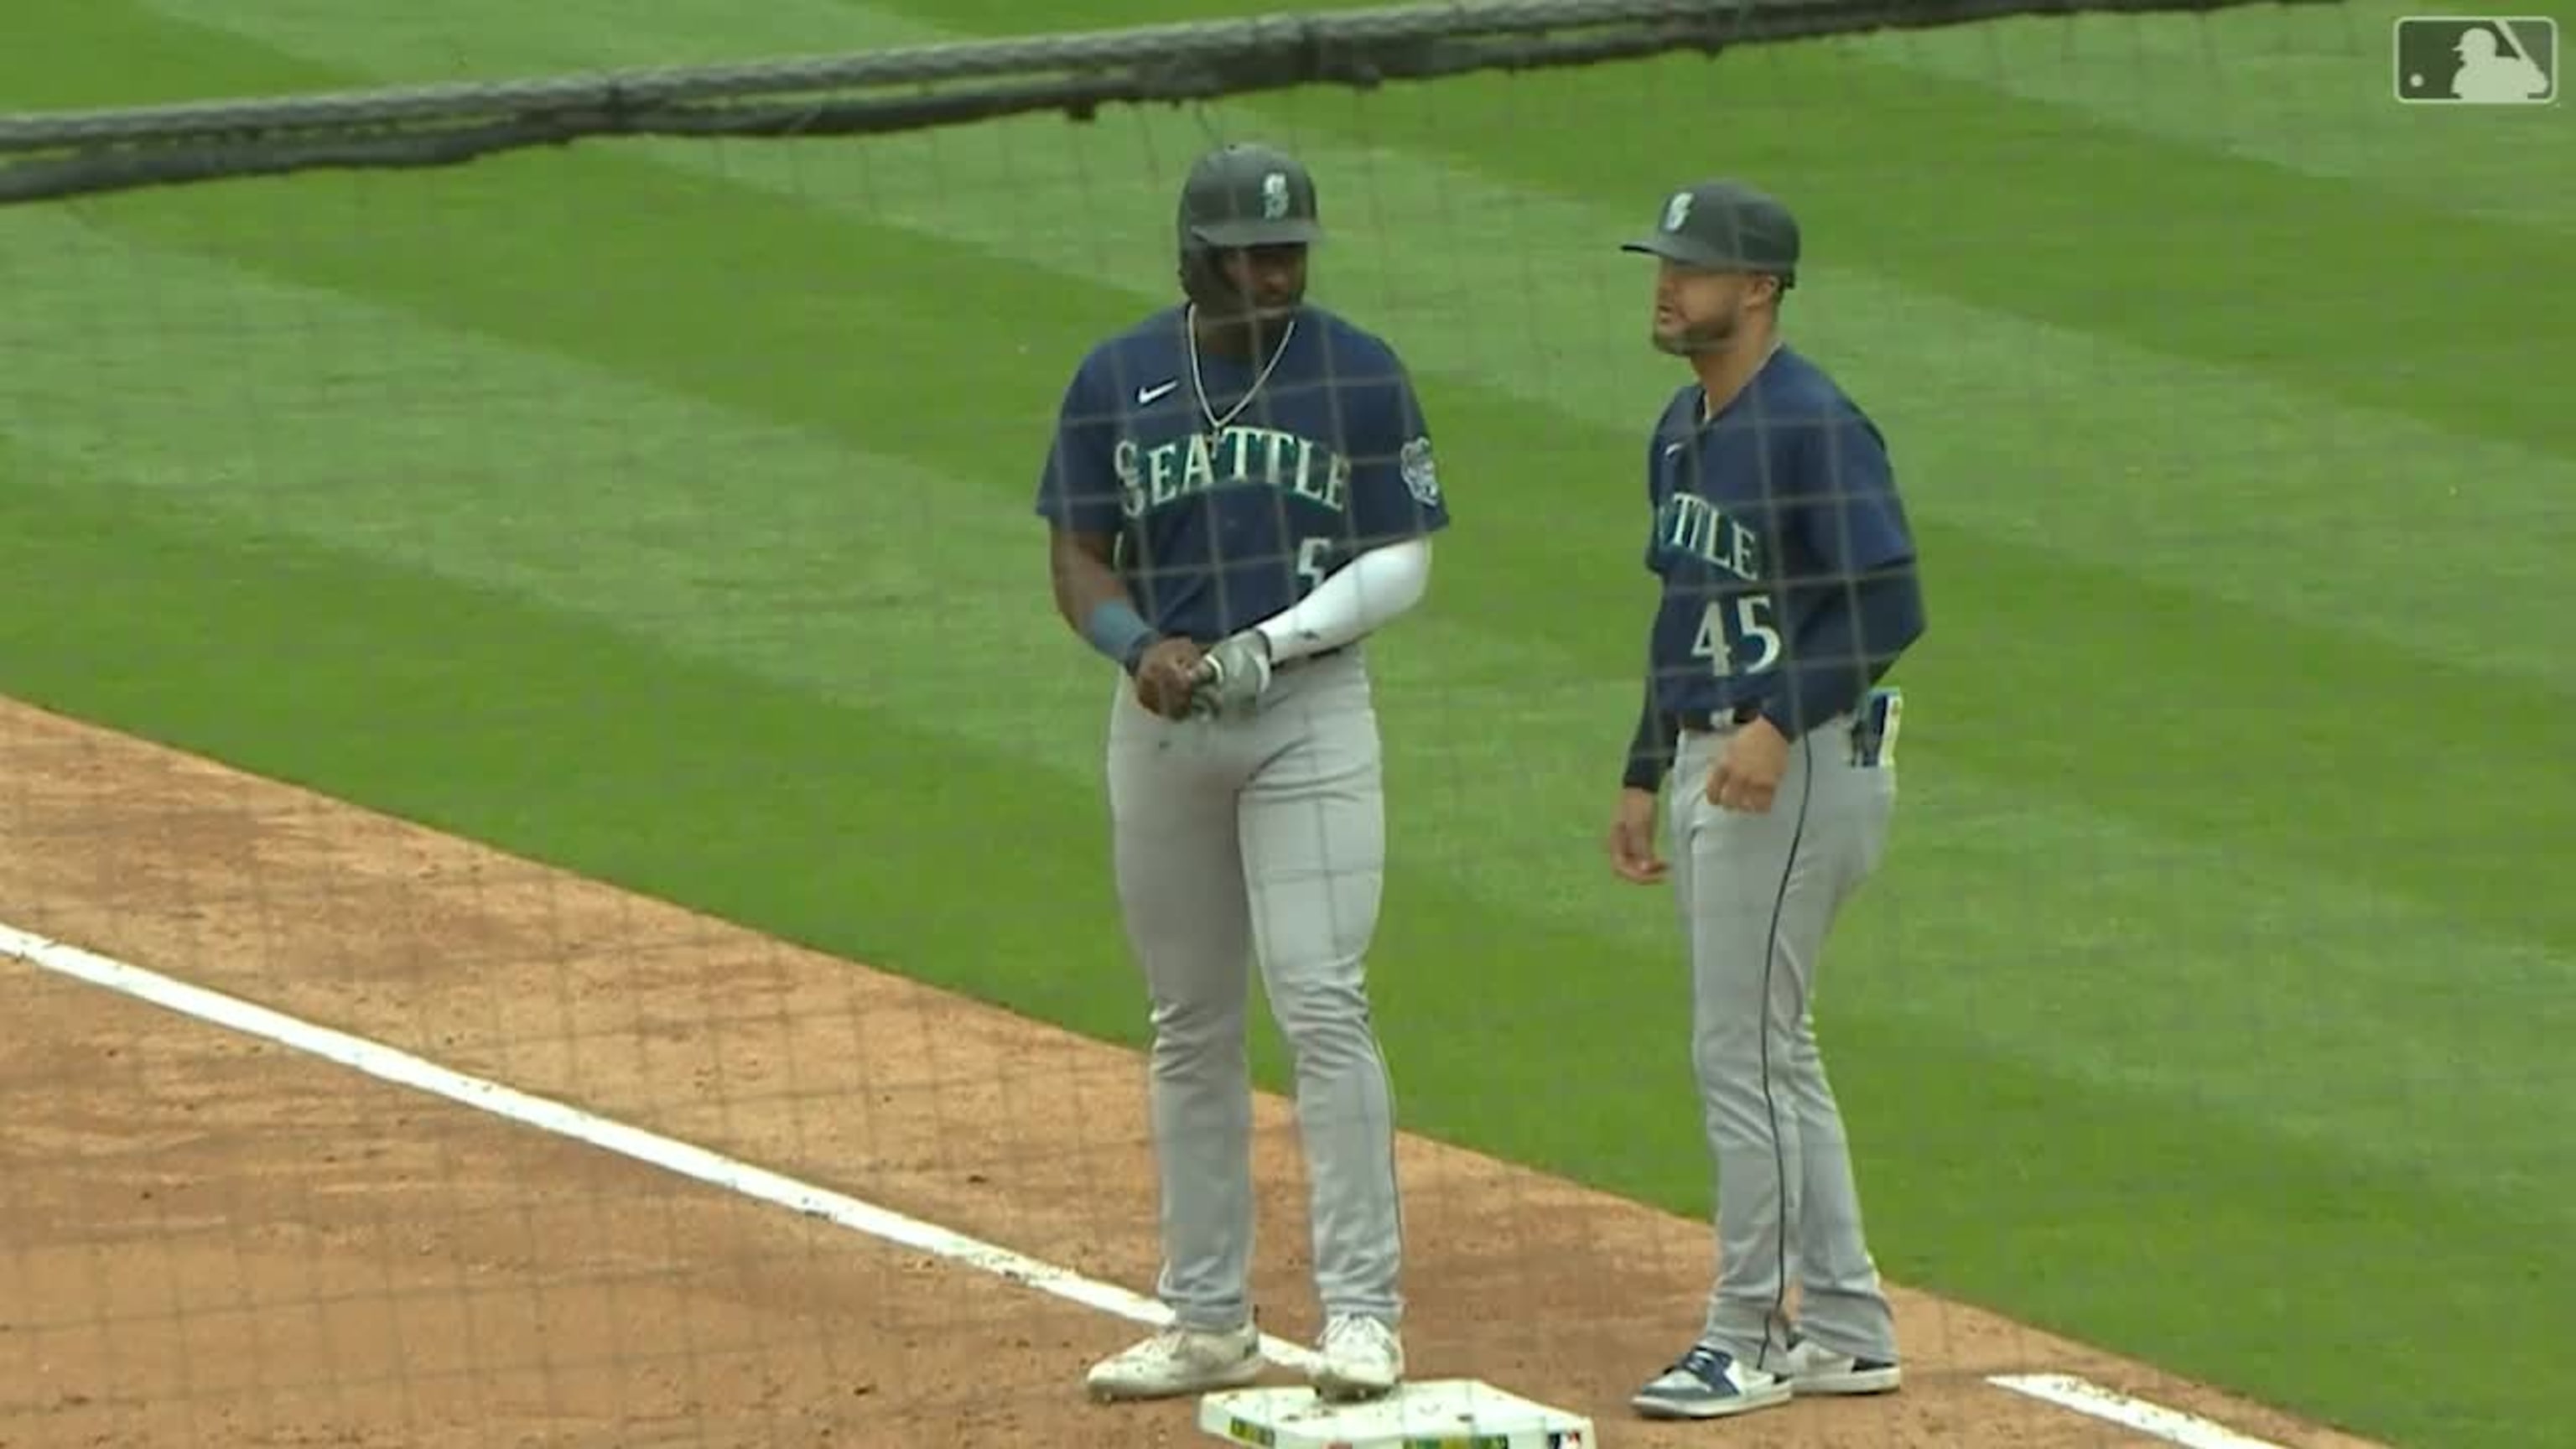 Taylor Trammell, standout of Mariners spring so far, may steal LF